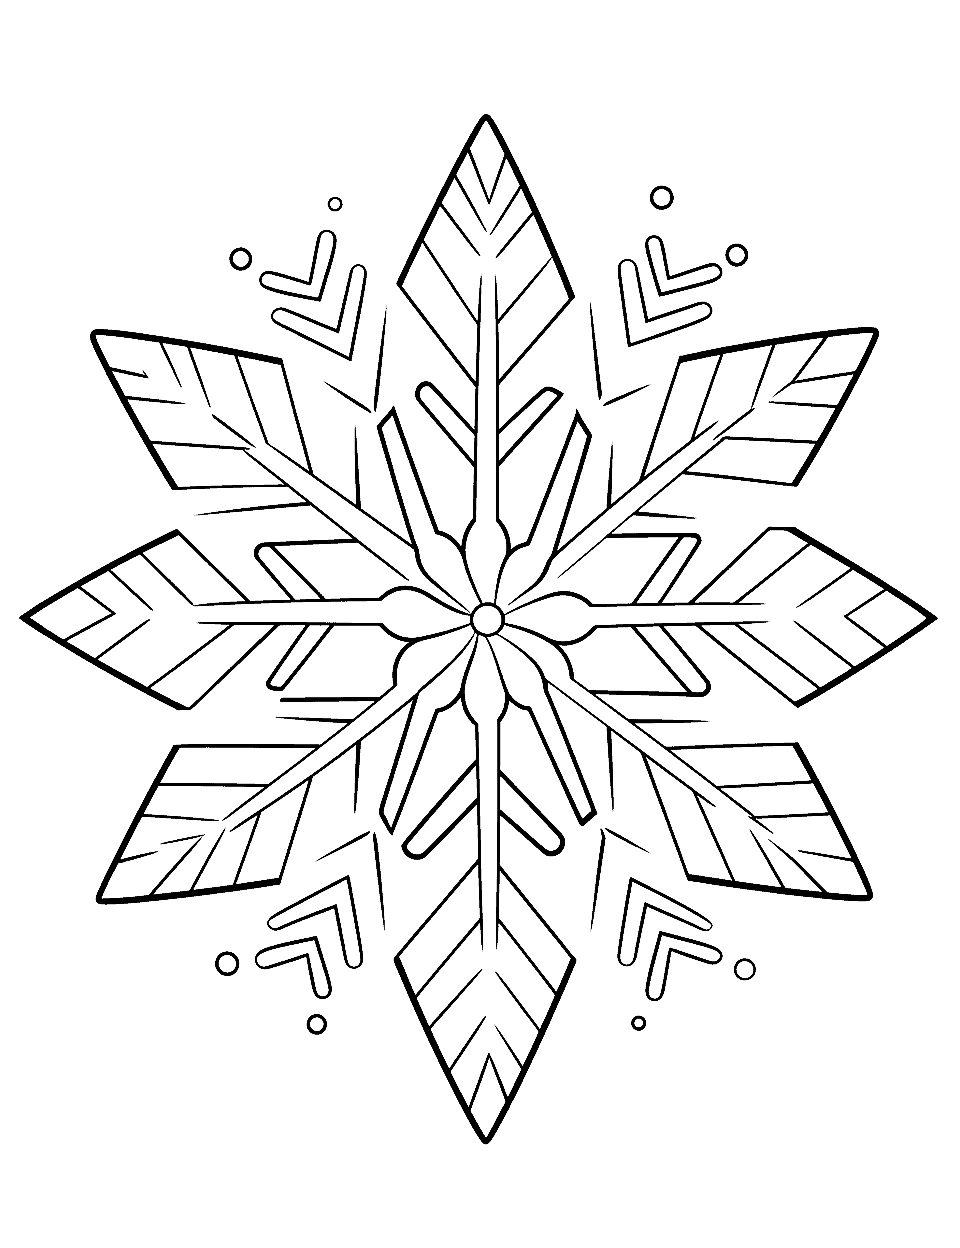 Intricate Snowflake Design Winter Coloring Page - A detailed zentangle snowflake design for older kids who love a coloring challenge.